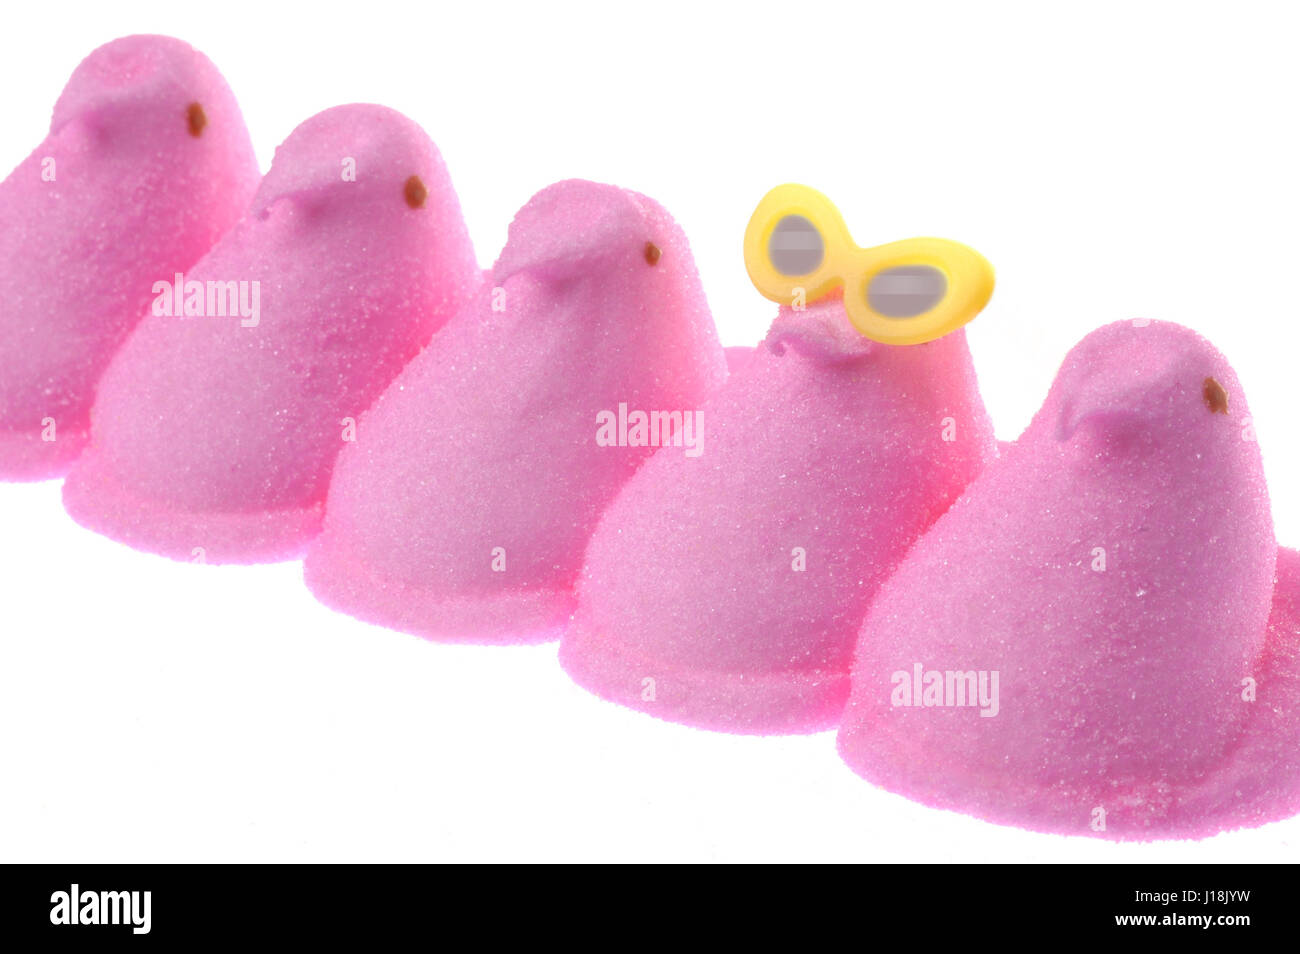 Peeps marshmallow chick candy, classic springtime or Easter treat. One fun, individual peep is wearing sunglasses Stock Photo